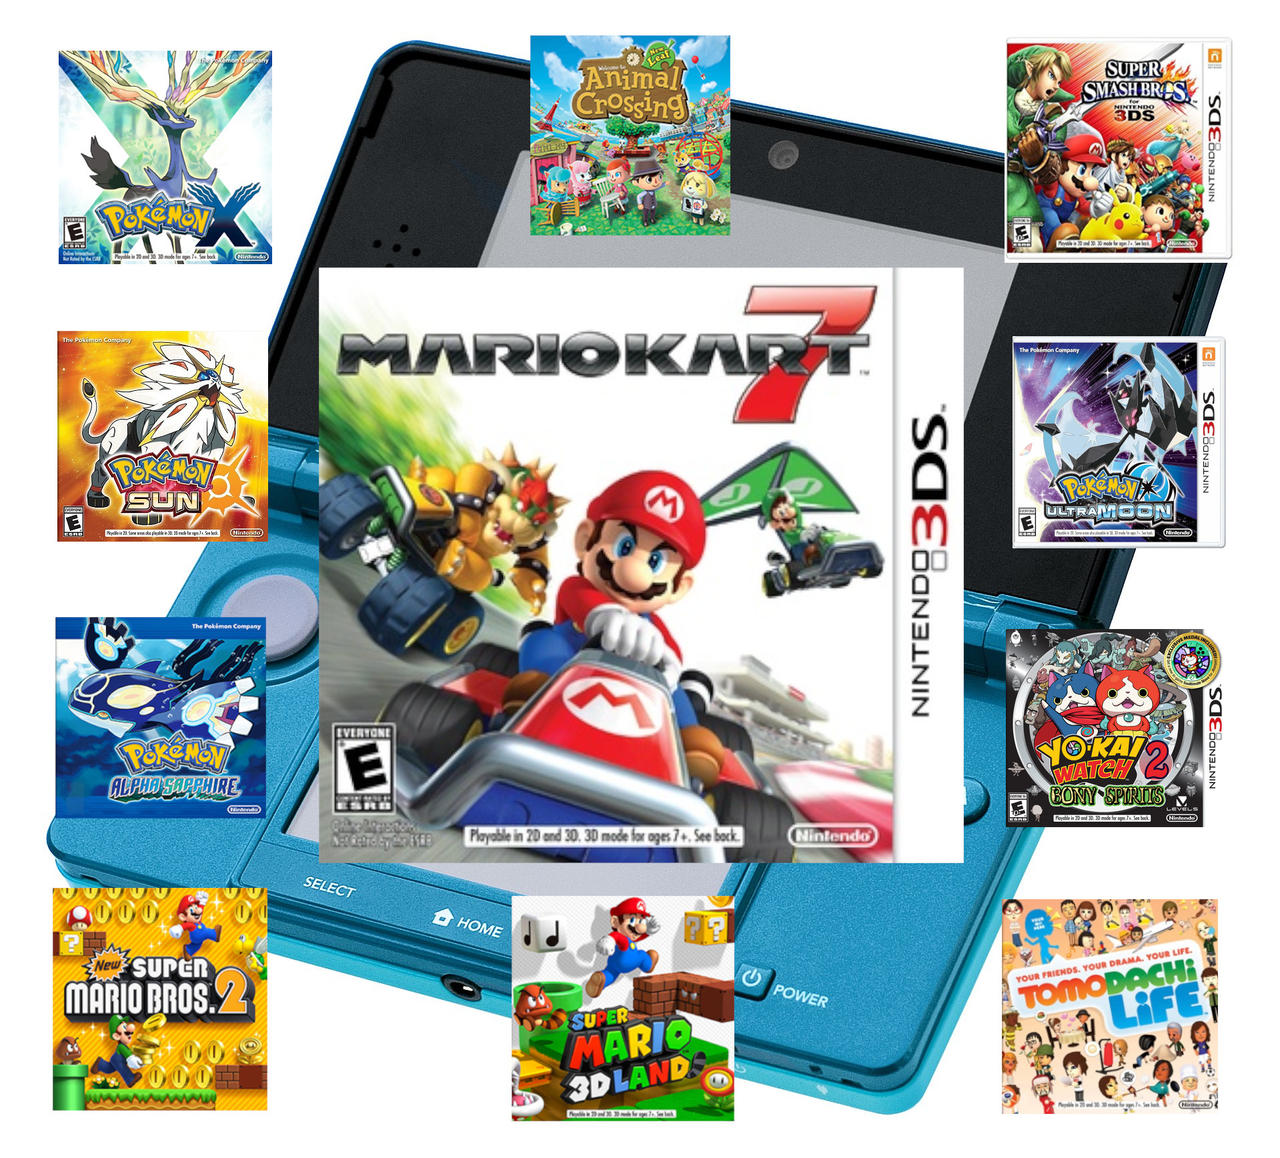 30 Best Nintendo 3DS Games Of All Time